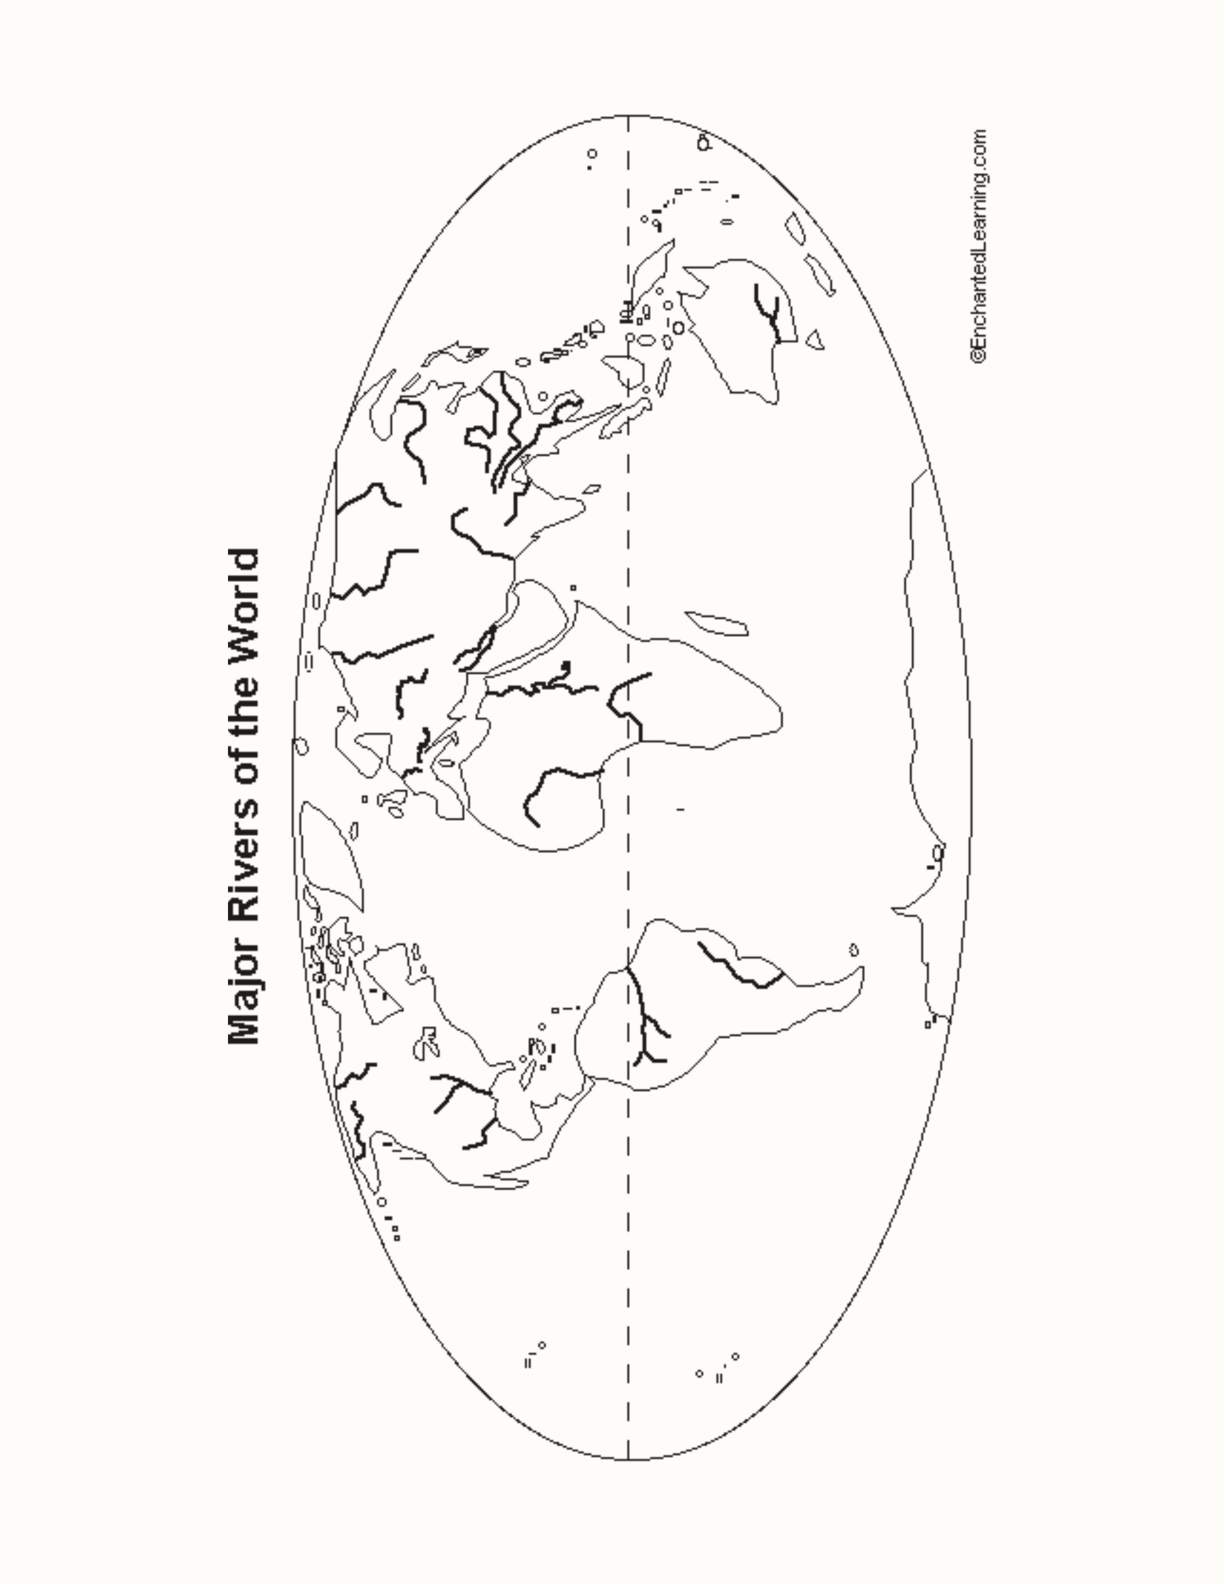 Outline Map: Major Rivers of the World interactive printout page 1